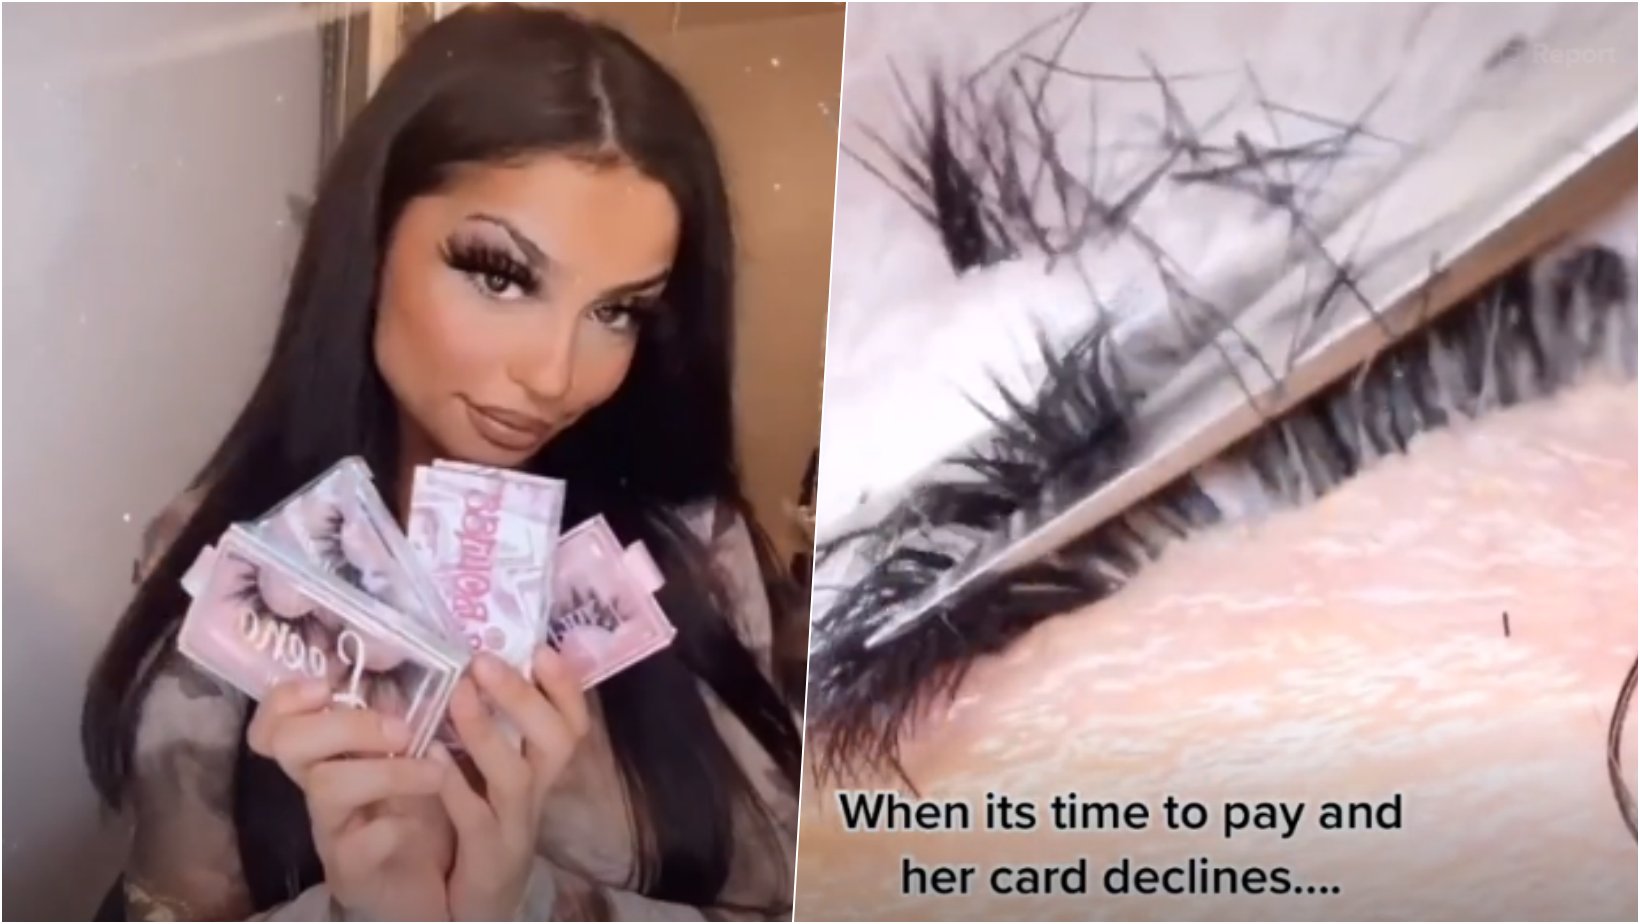 6 facebook cover 11.png?resize=1200,630 - Beautician Cuts Off Customer's Eyelashes After Her Credit Card Payment Was Declined